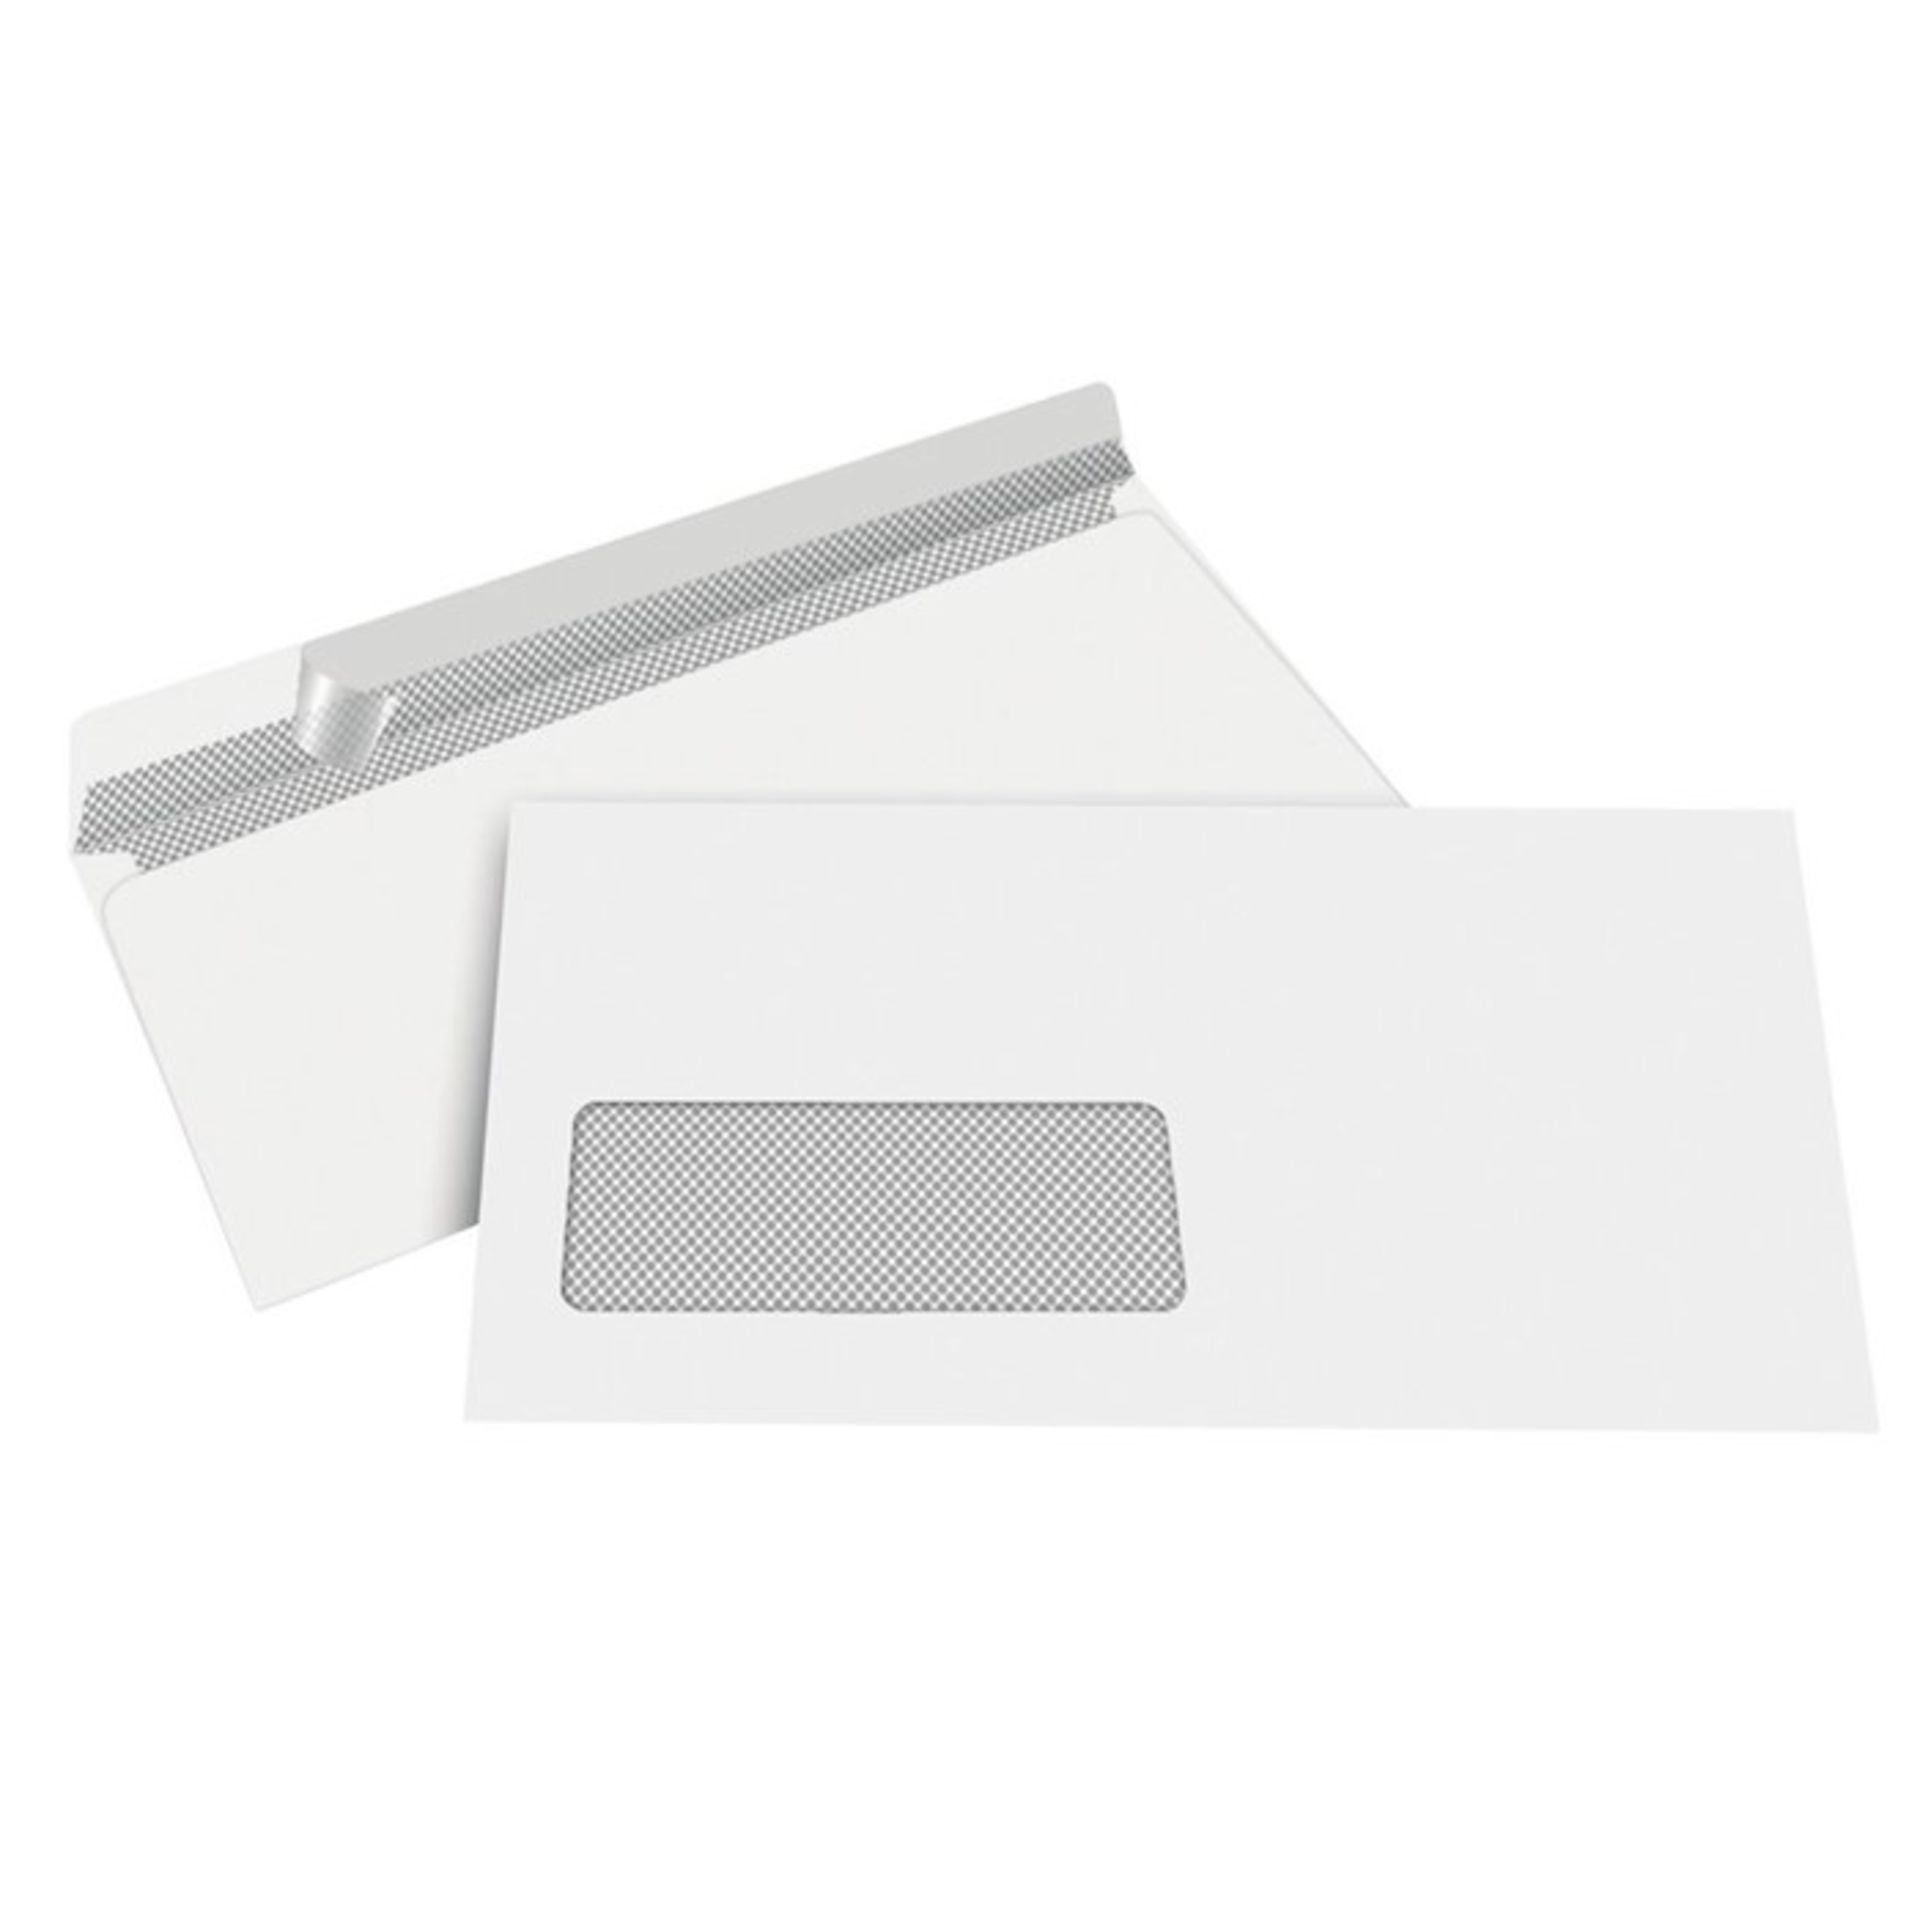 1 BOX TO CONTAIN 40 PACKS OF DL PREMIUM PEEL AND SEAL ENVELOPES WITH WINDOW BOTTOM LEFT IN WHITE -